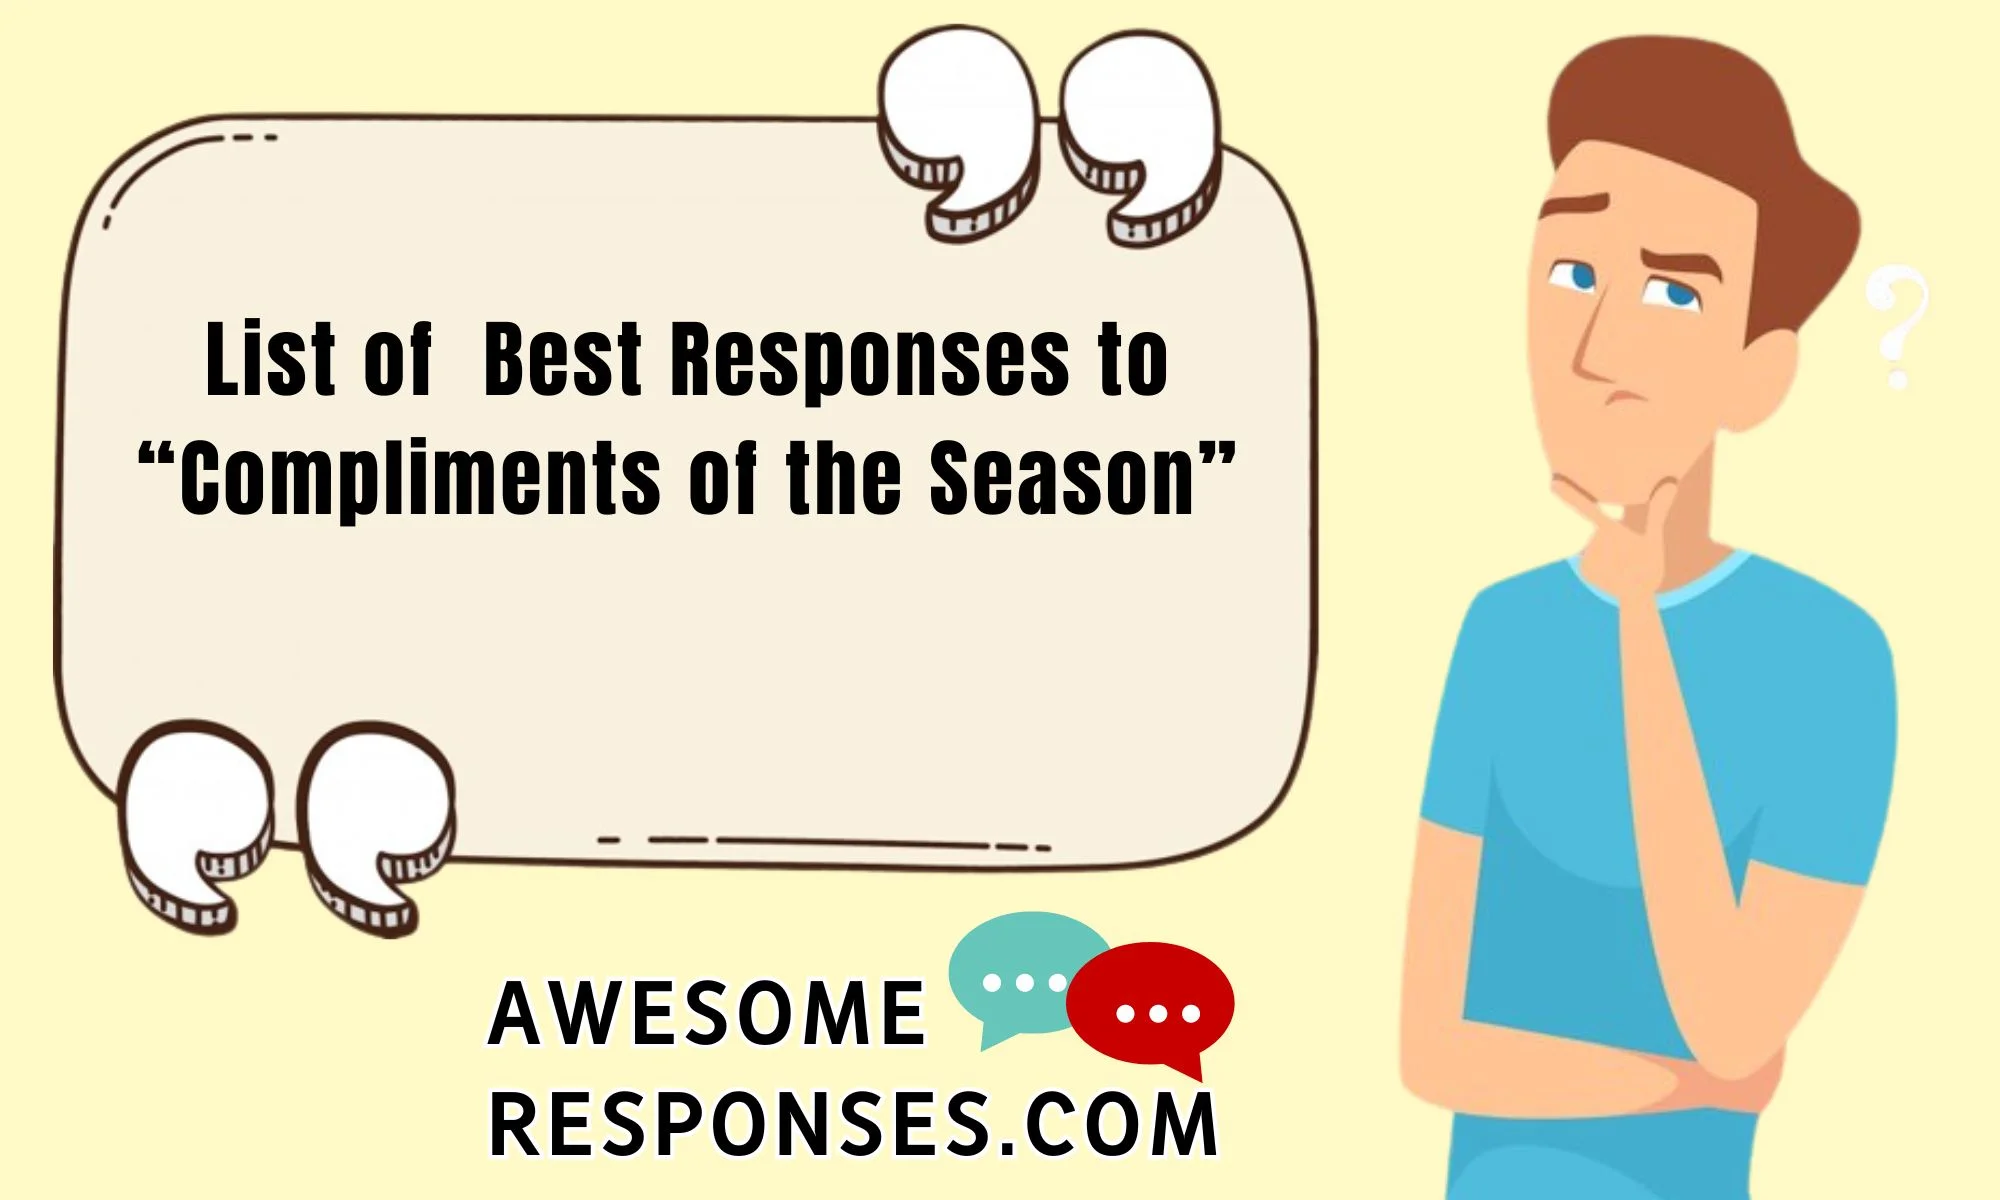 List of Best Responses to “Compliments of the Season”